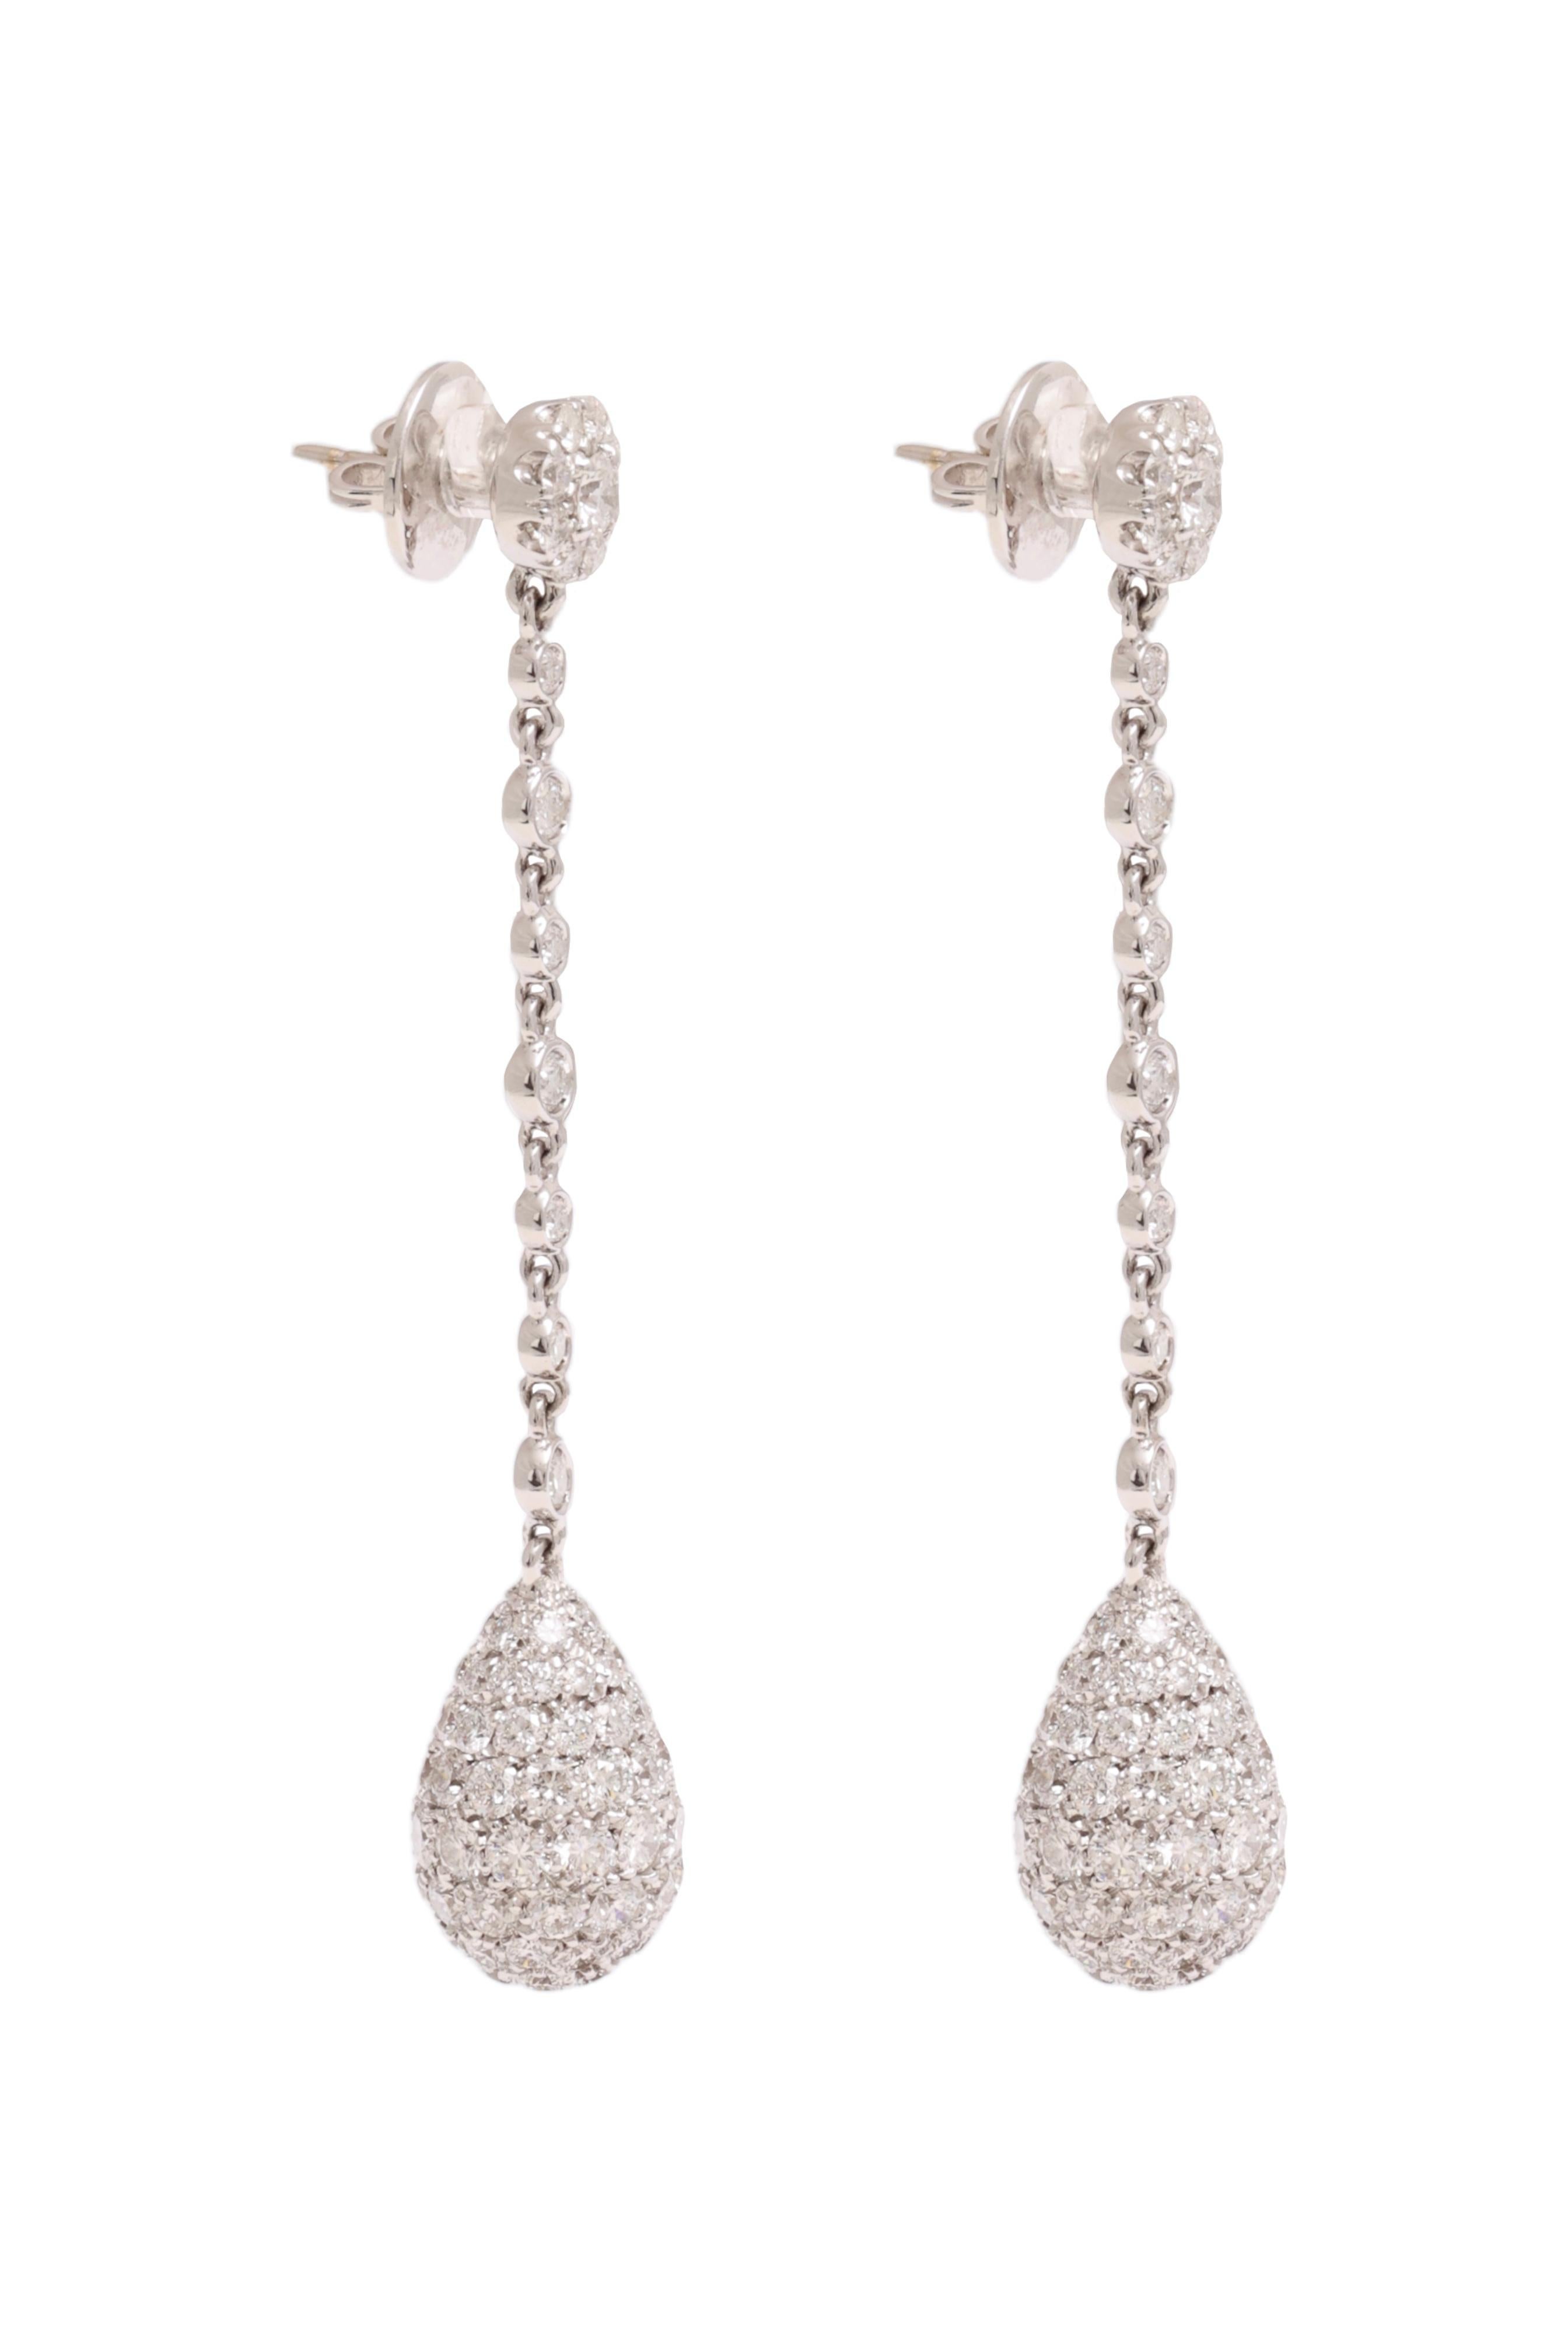 Brilliant Cut 18kt White Gold Drop Earrings with 10.10 Ct Diamonds For Sale